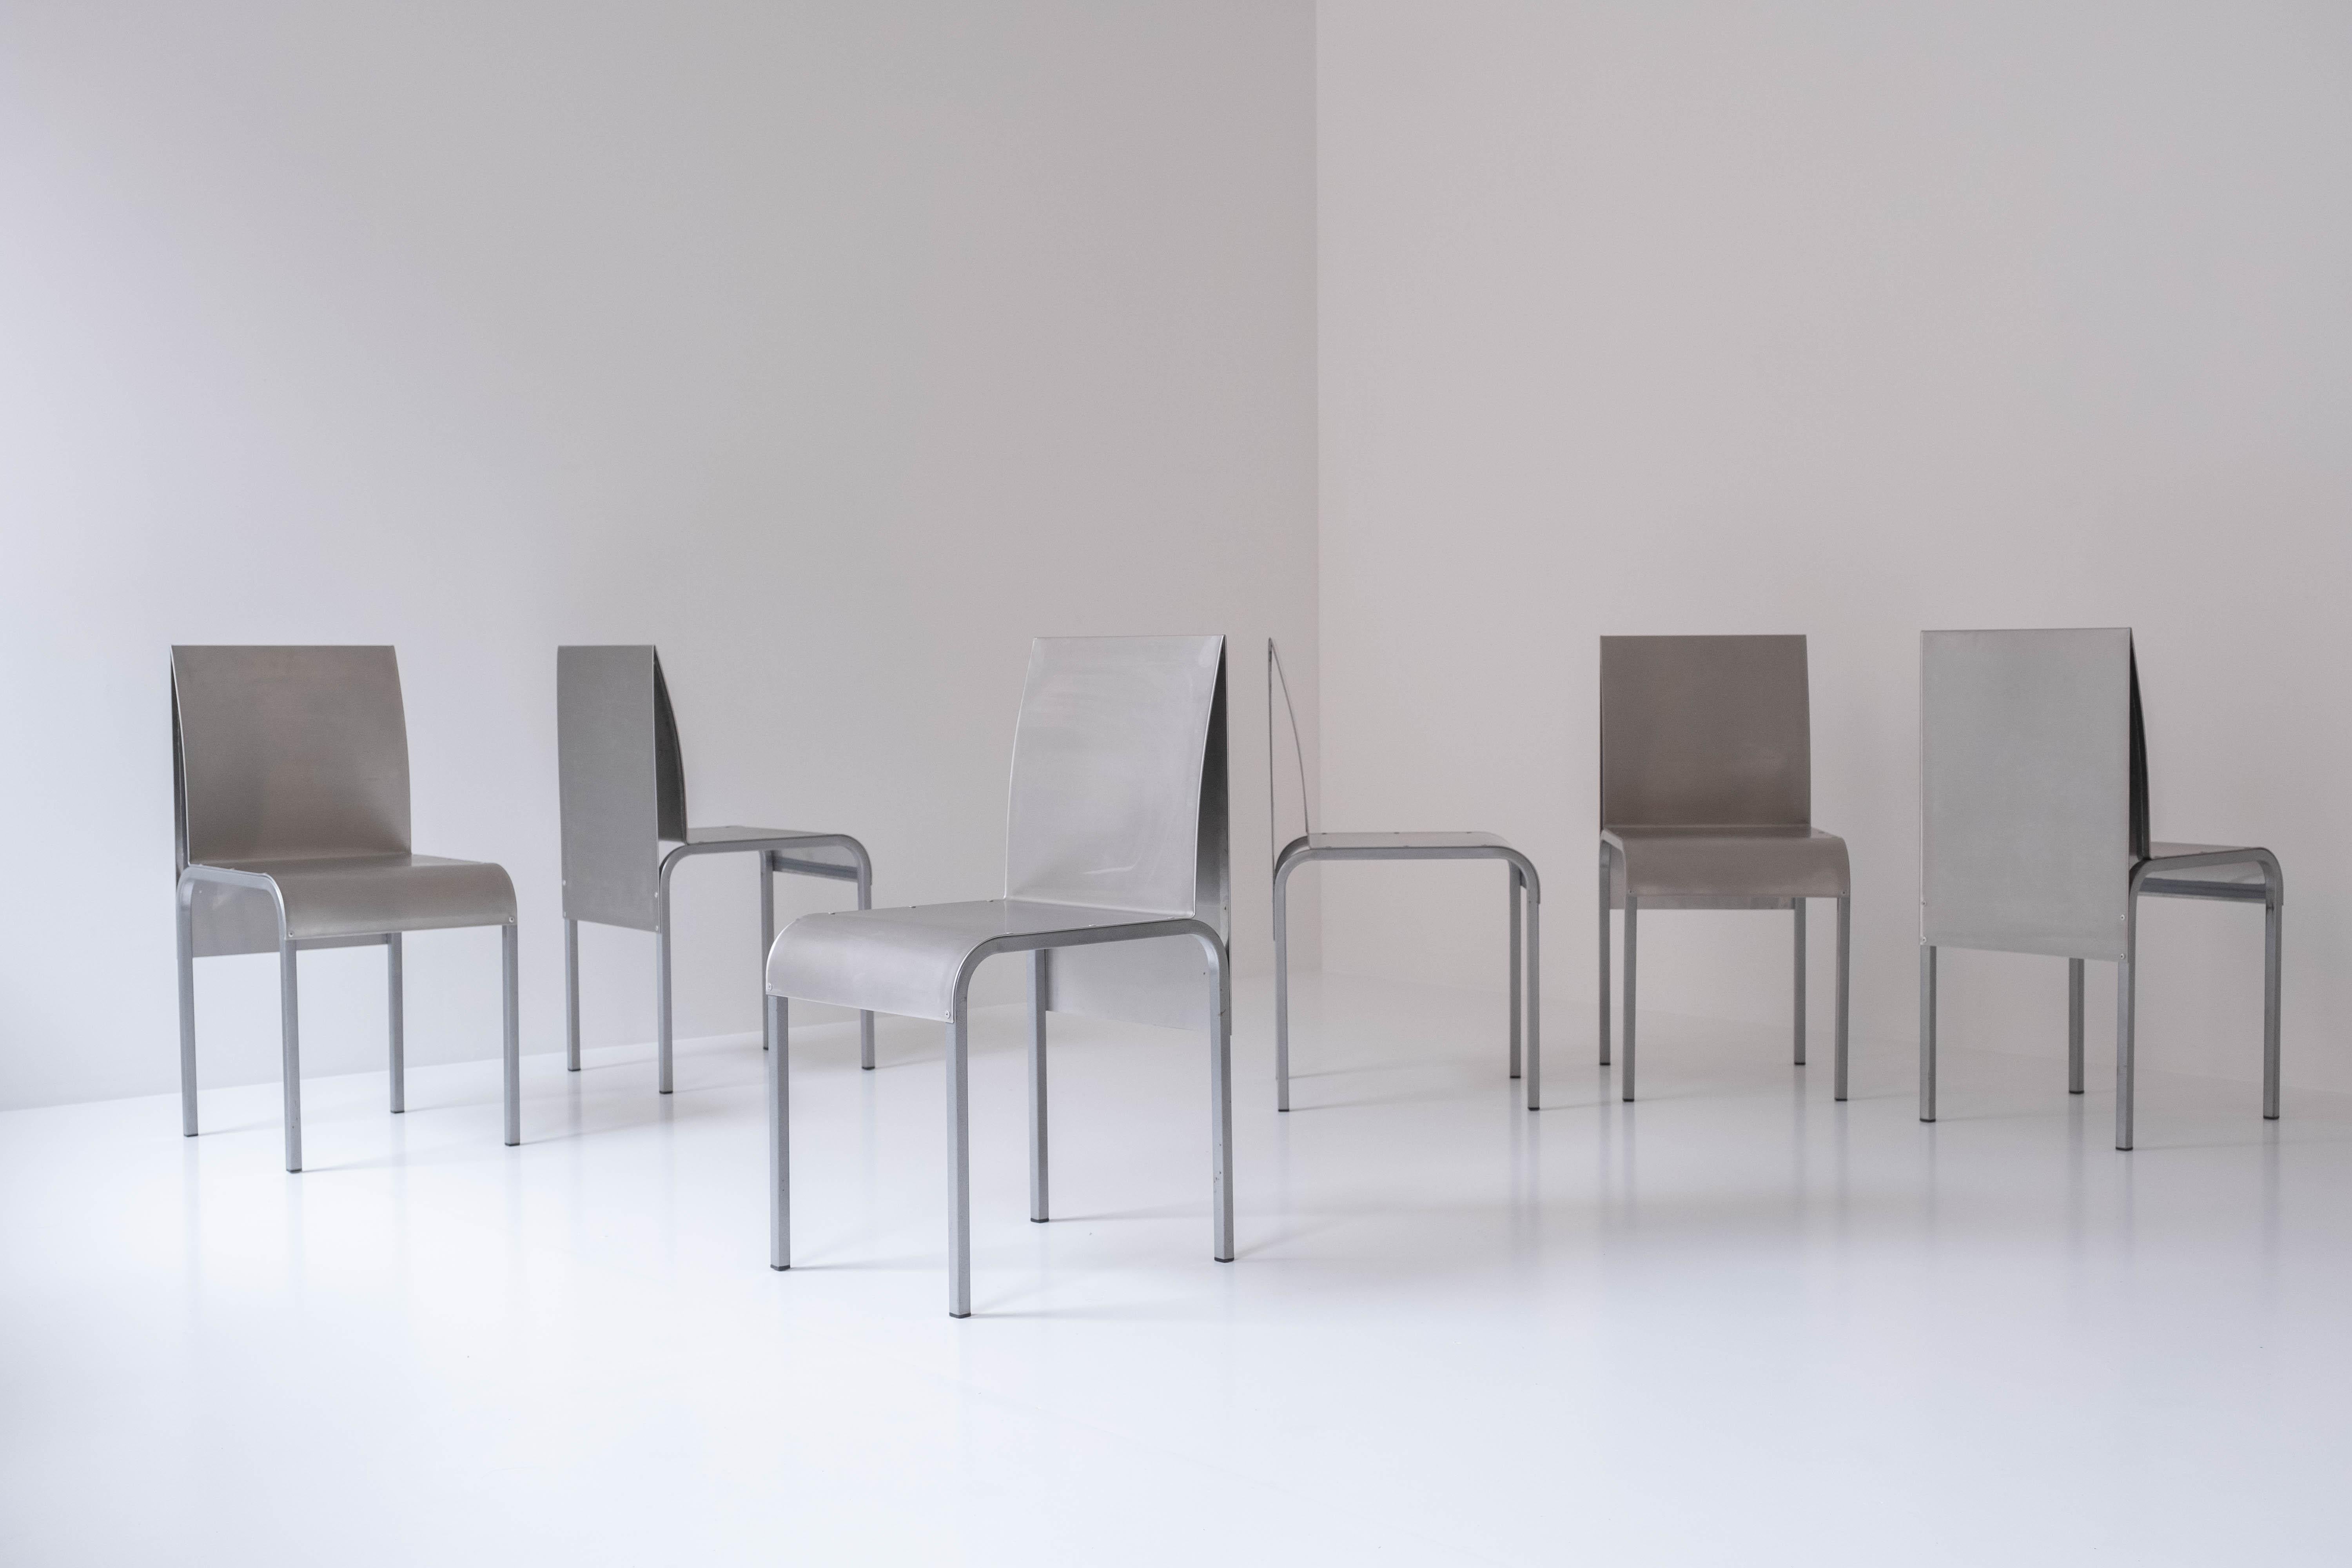 Set of 6 dining chairs in bent aluminum, designed and manufactured in Belgium around the 1980’s. These chairs have metal legs and features minor wear from age and use.